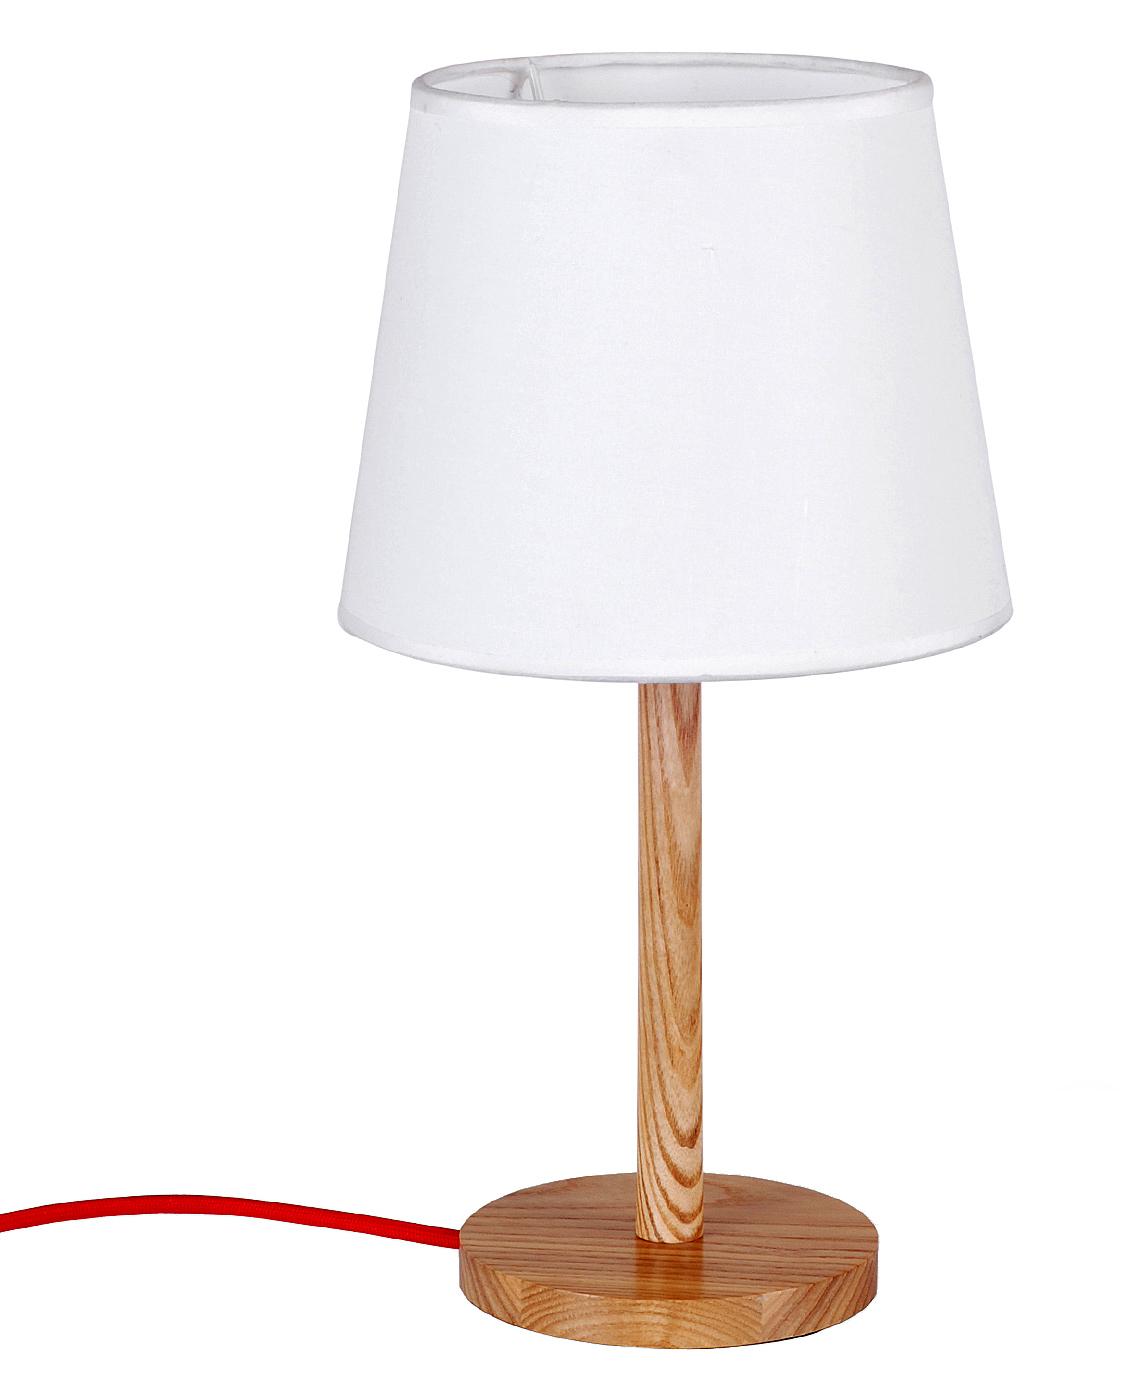 Solid wood base fabric shade desk table lamp